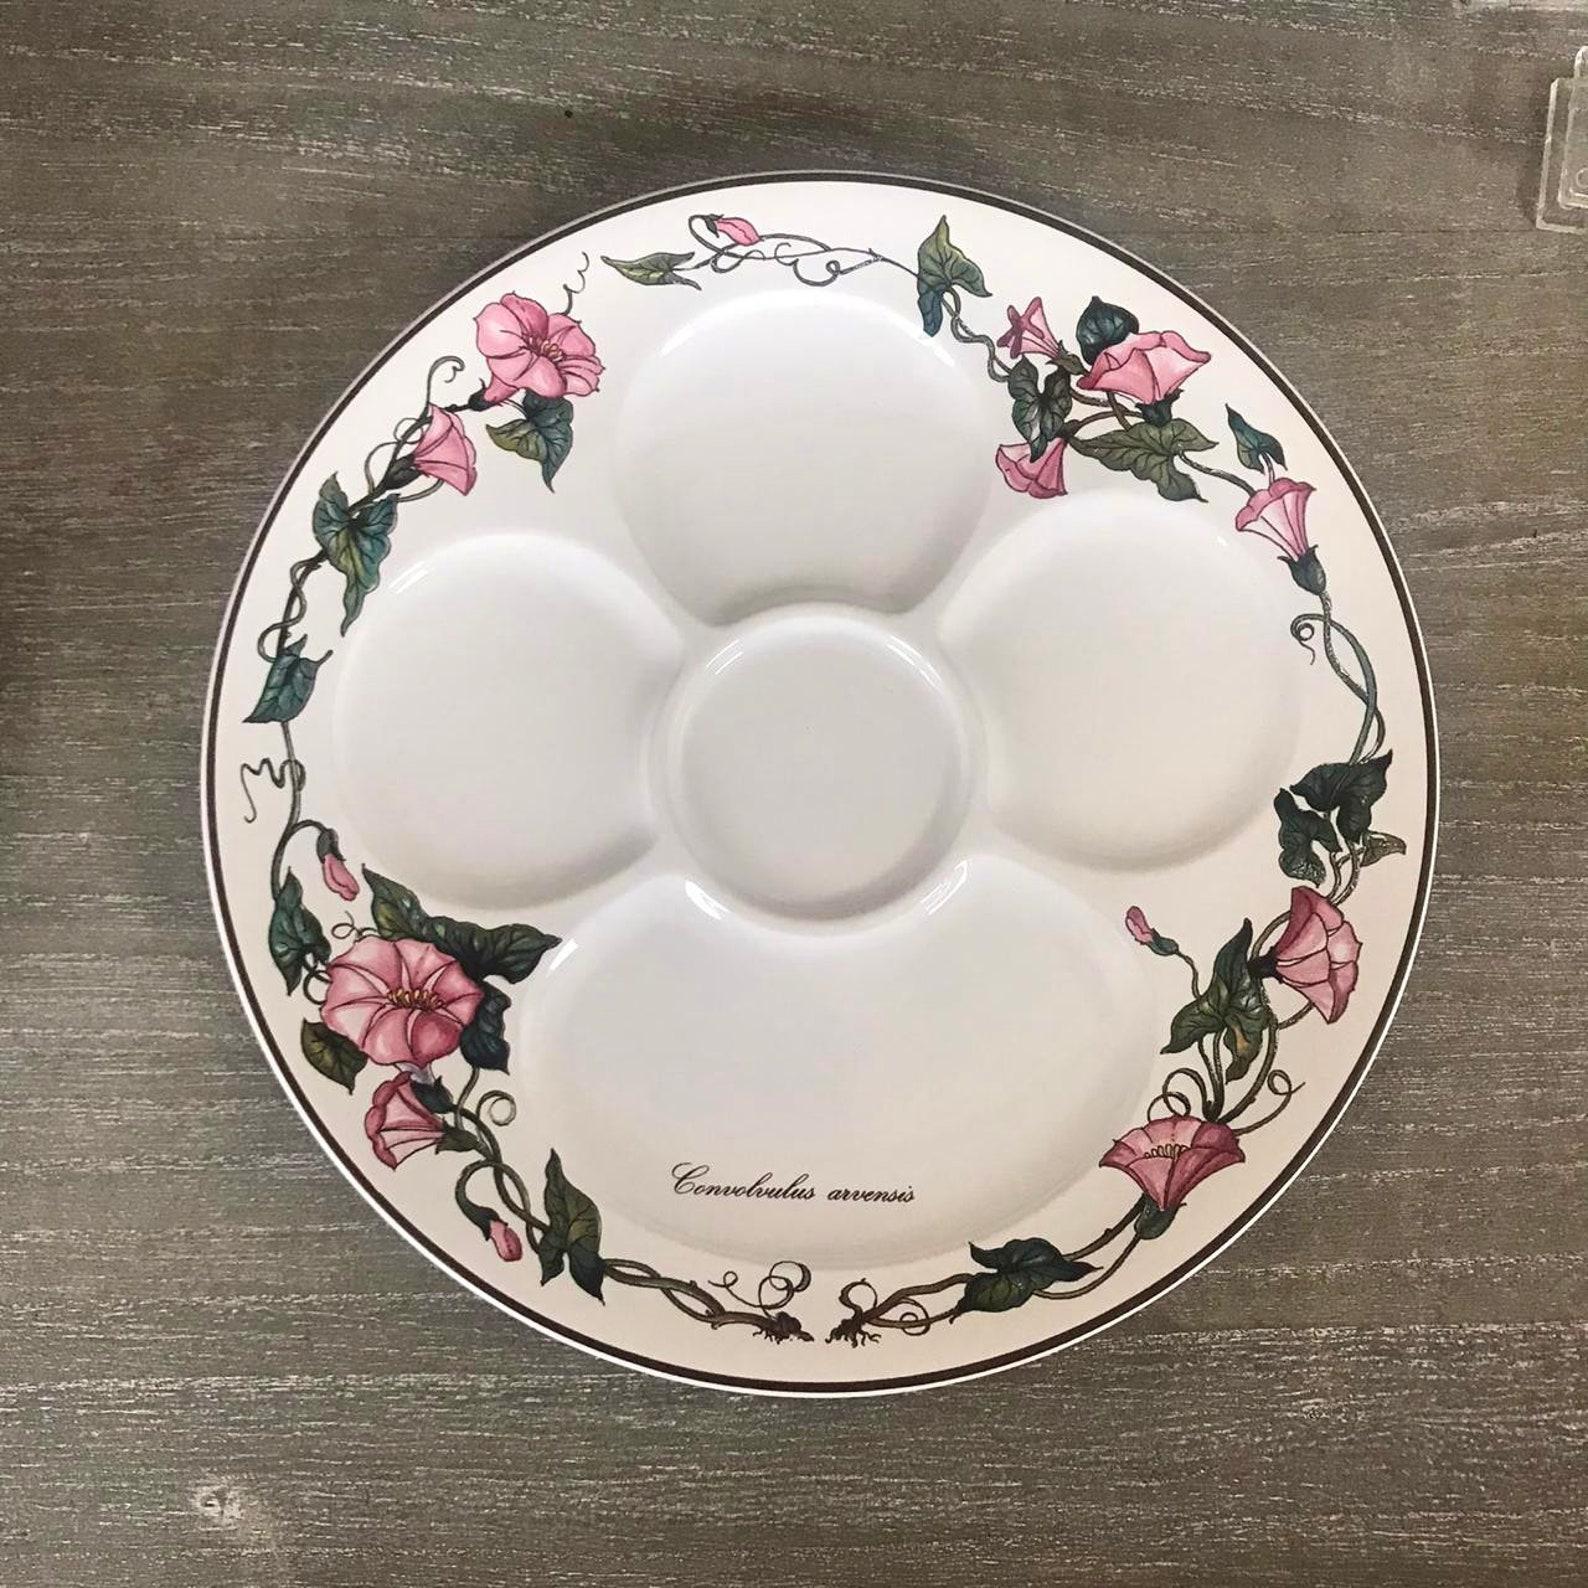 Villeroy & Boch Botanica Section Plates. 

The price is for 1 plate.

Also used as oyster plates.

Villeroy and Boch Botanica - is the most lovely collection. 

Vitro-porcelain. Dishwasher safe.

In excellent condition, no chips, cracks or